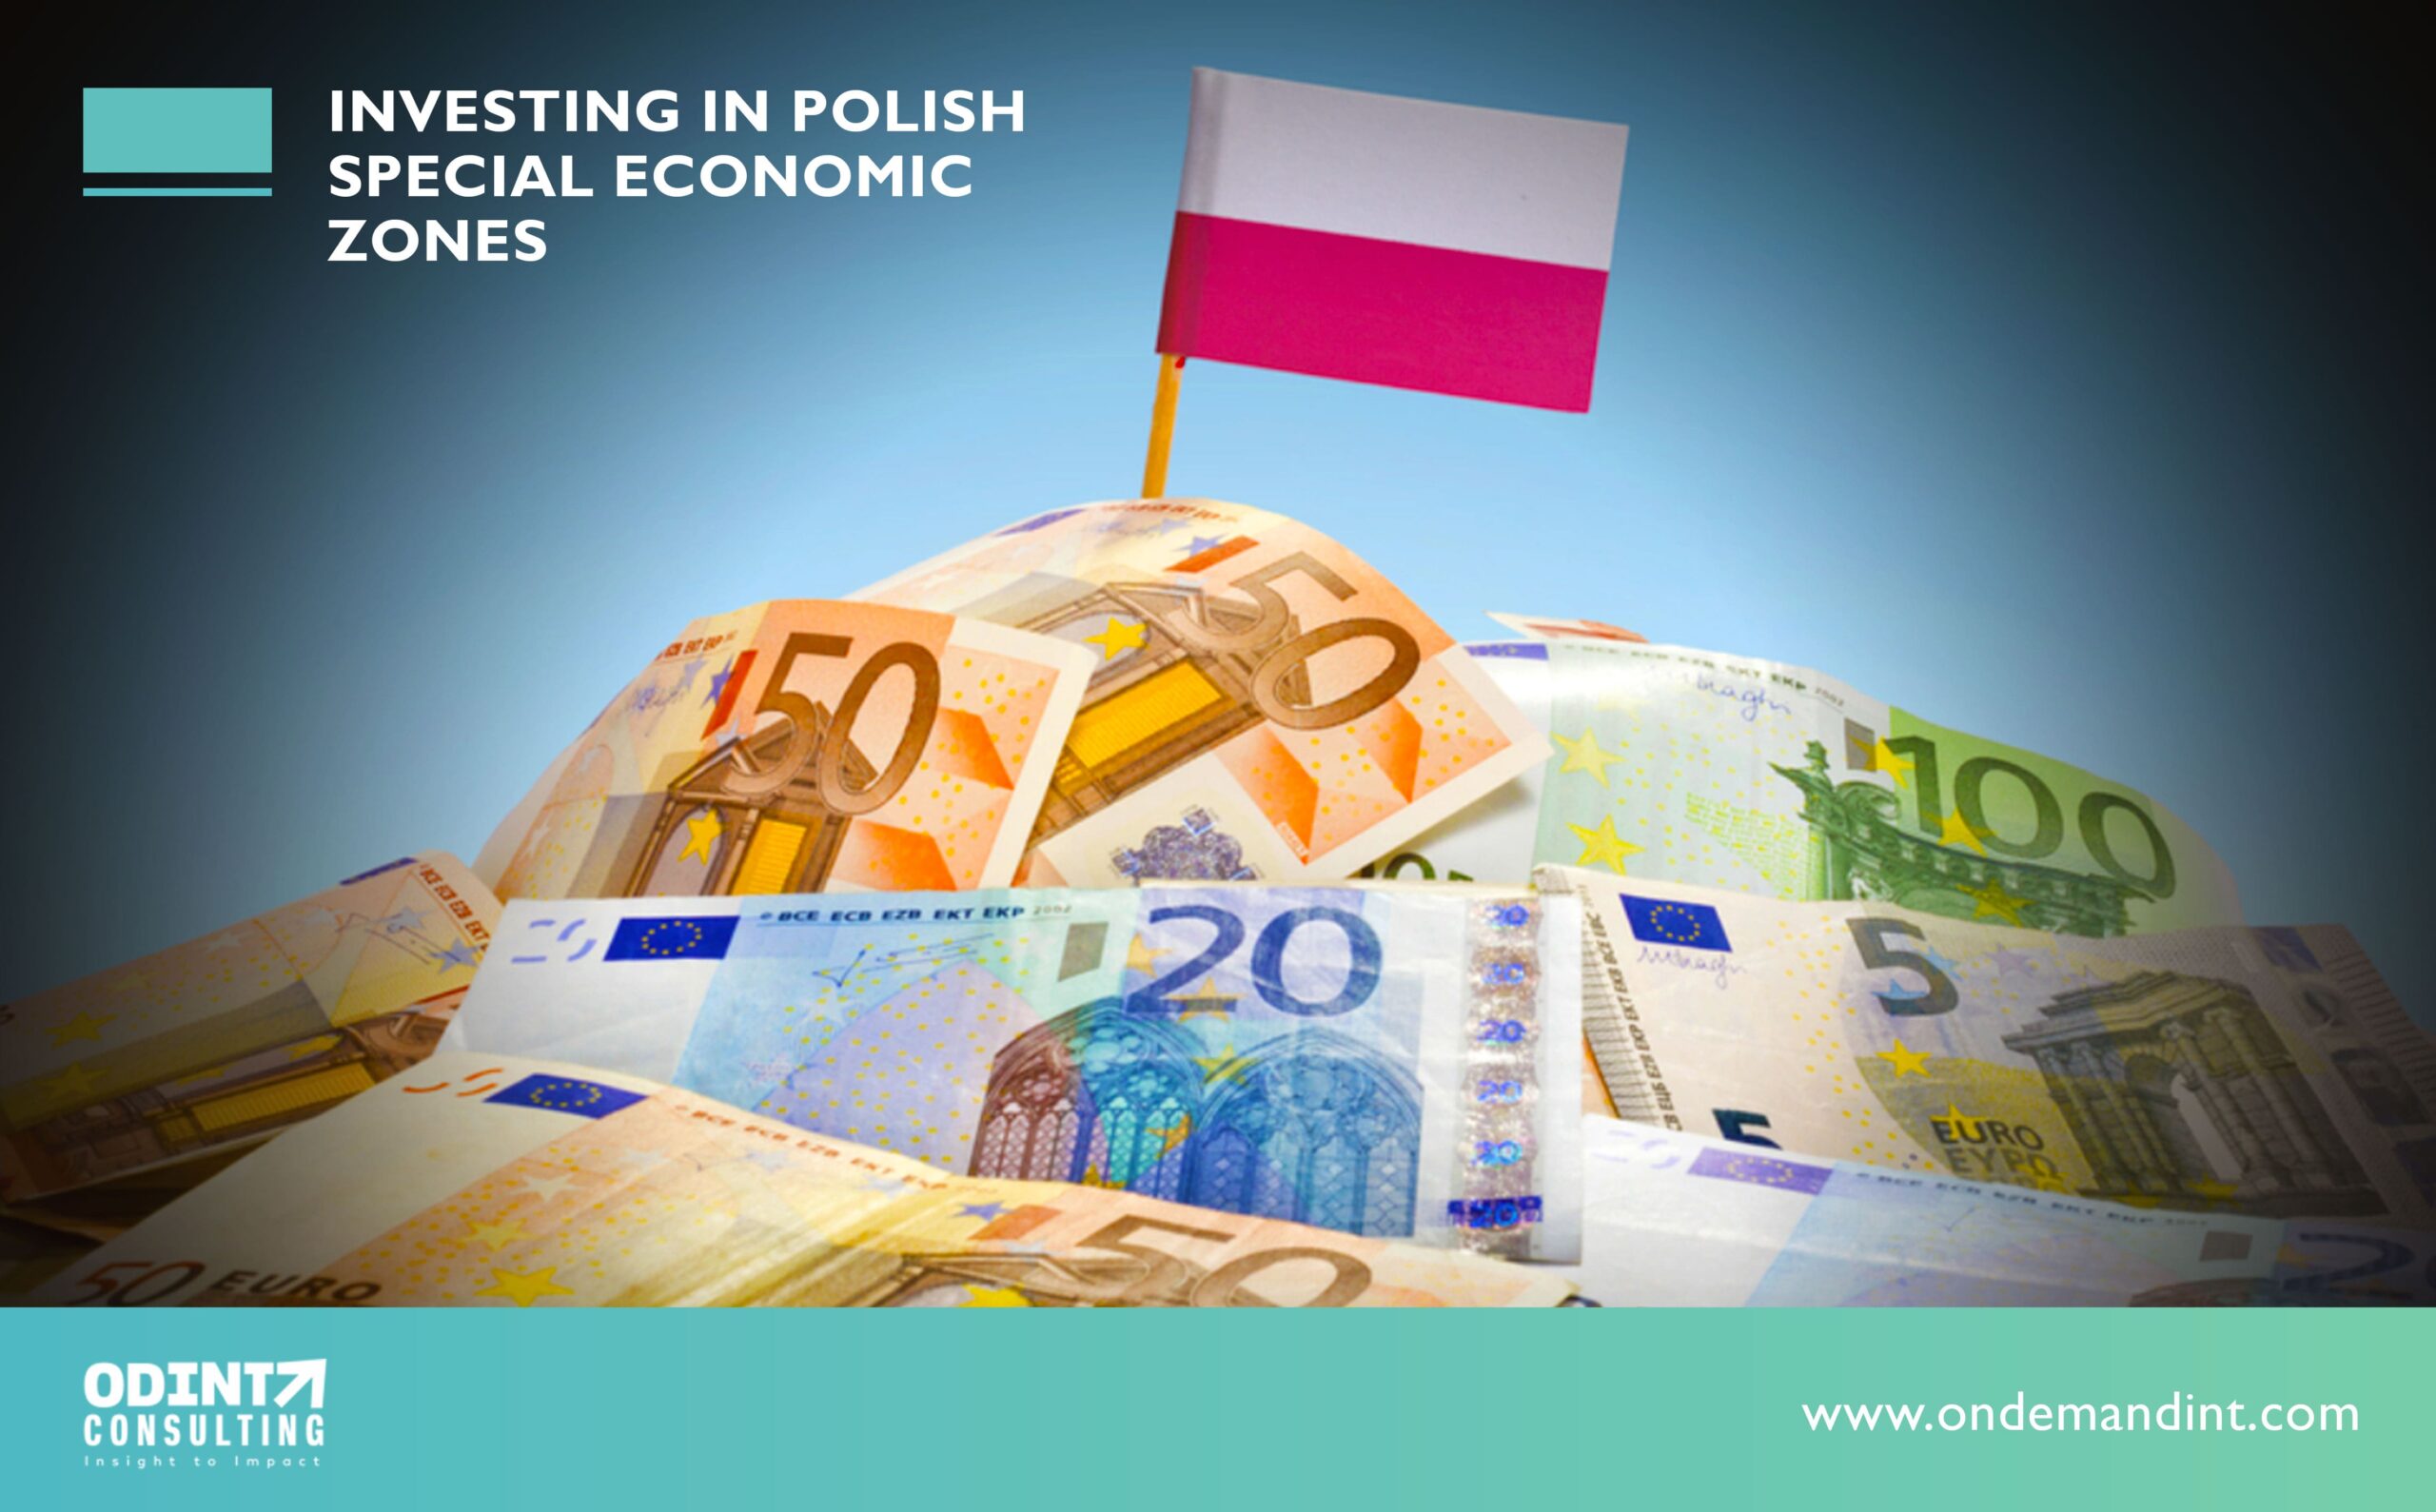 Investing in Polish Special Economic Zones: Meaning, Procedure & Tax Exemptions